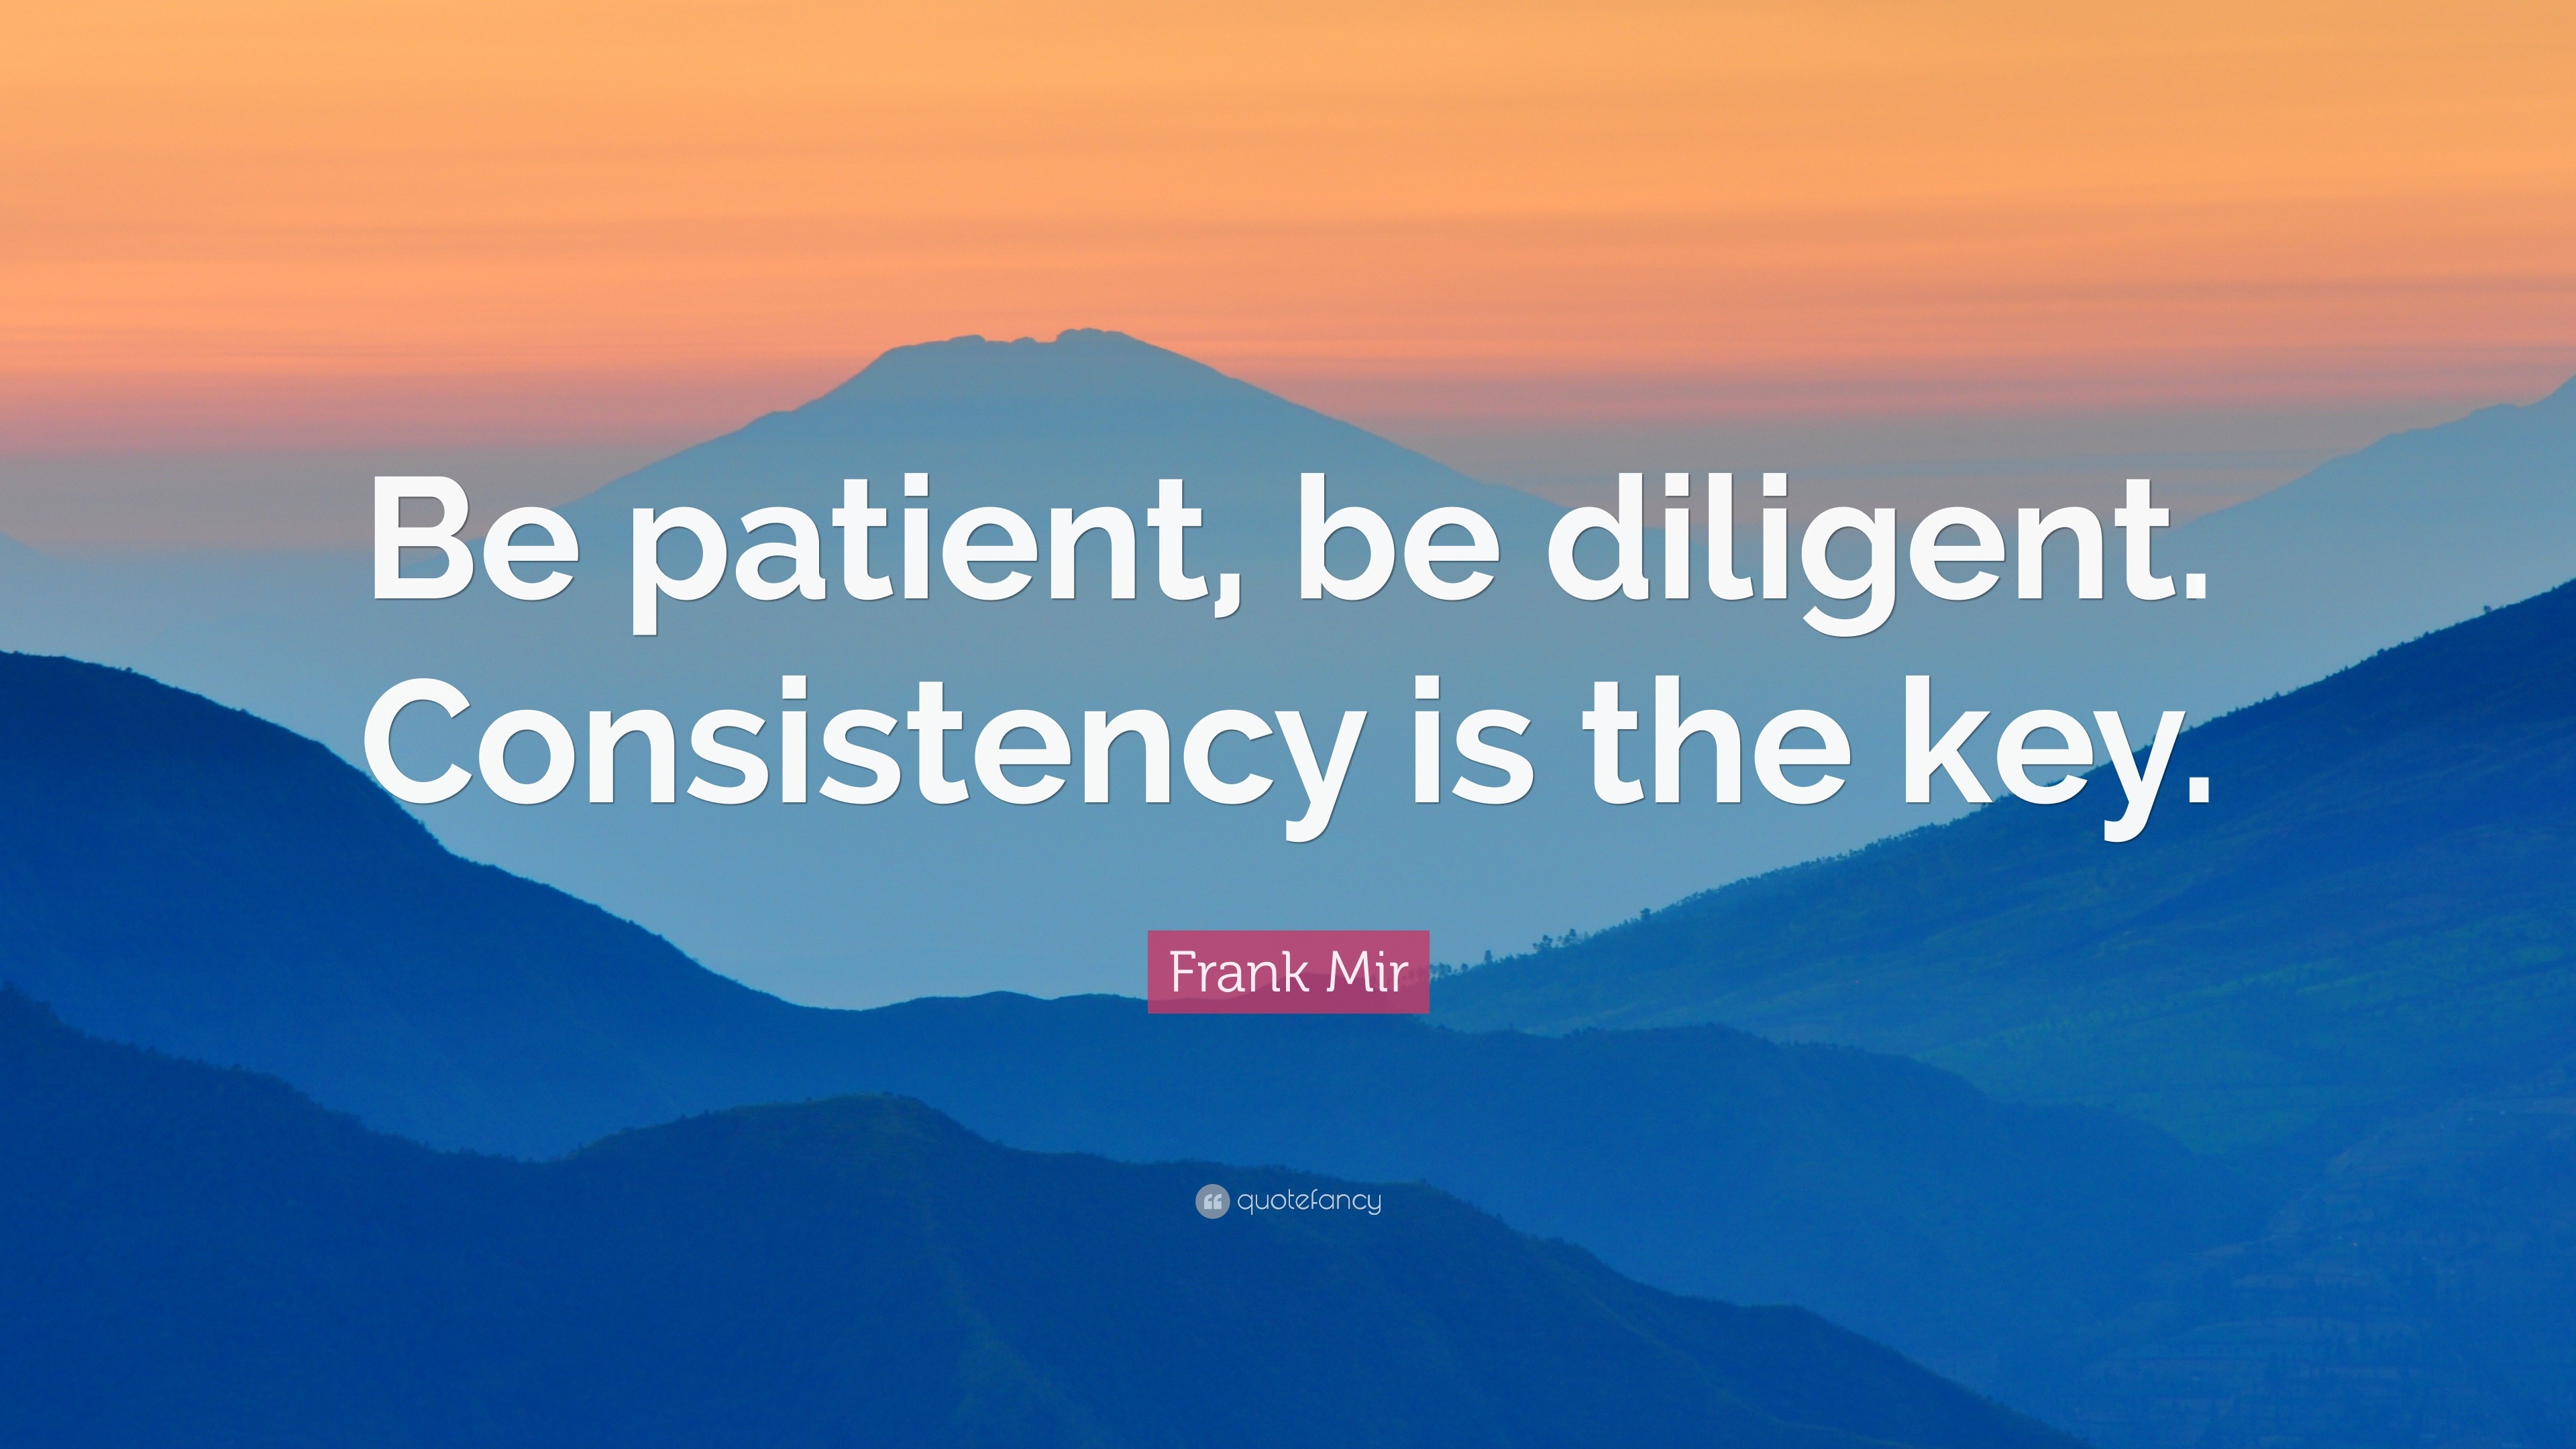 Frank Mir Quote: “Be patient, be diligent. Consistency is the key.”